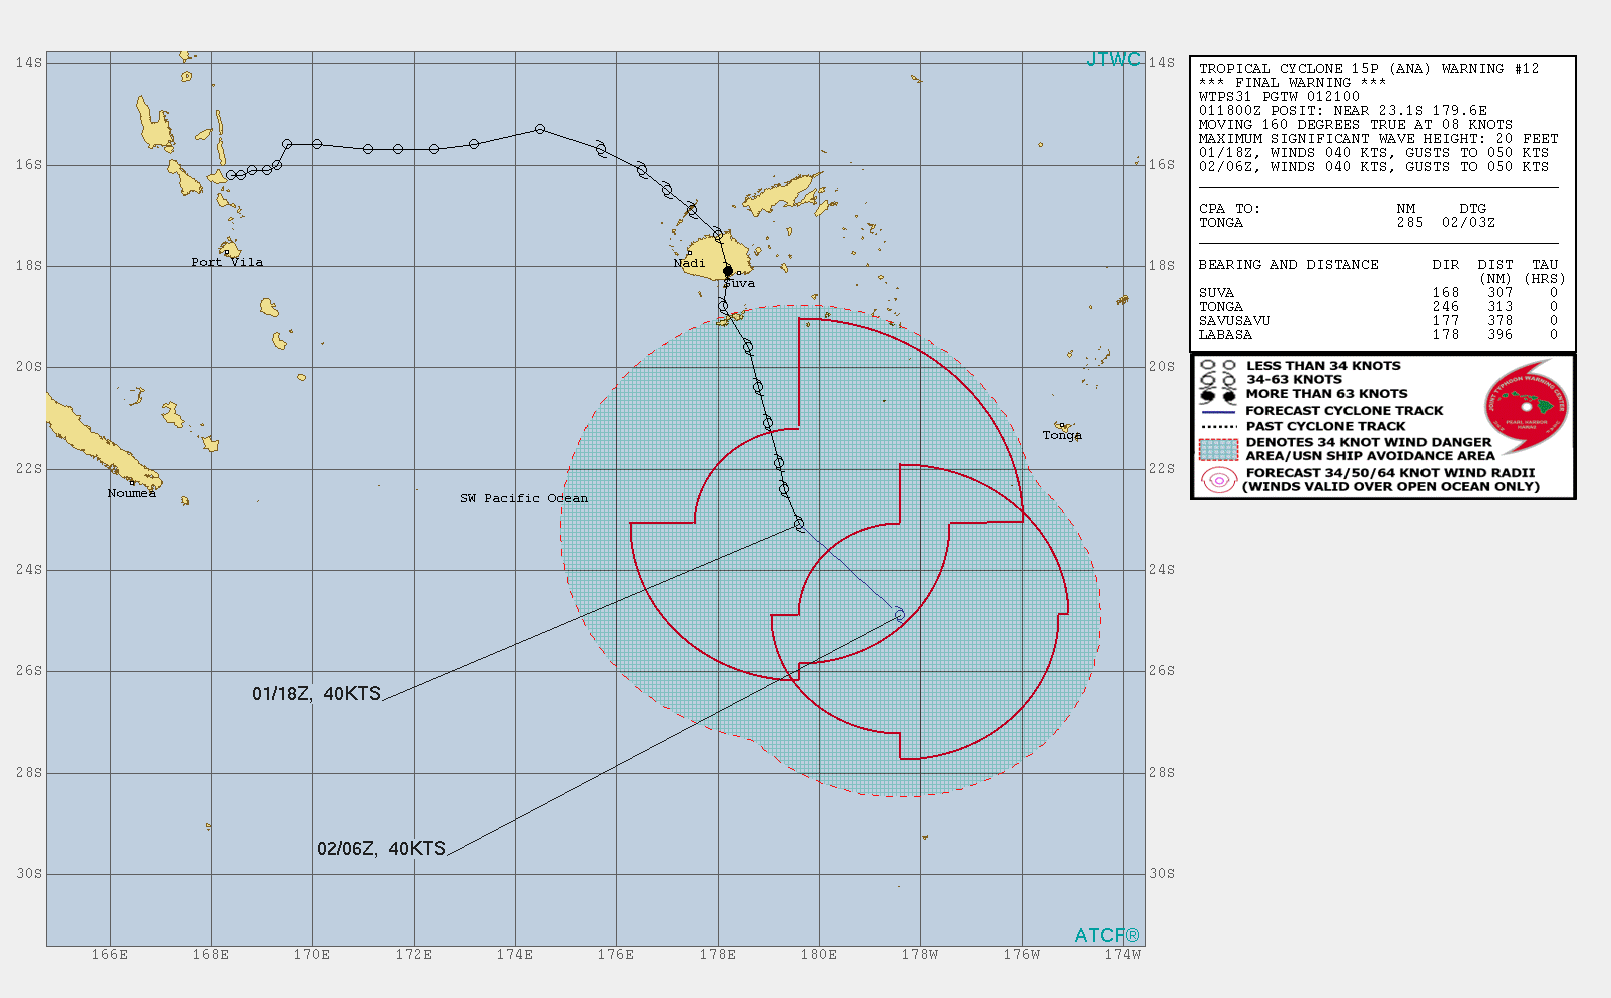 15P(ANA). WARNING 12/FINAL ISSUED AT 01/21UTC. PEAK INTENSITY WAS 65KNOTS: US/CATEGORY 1.